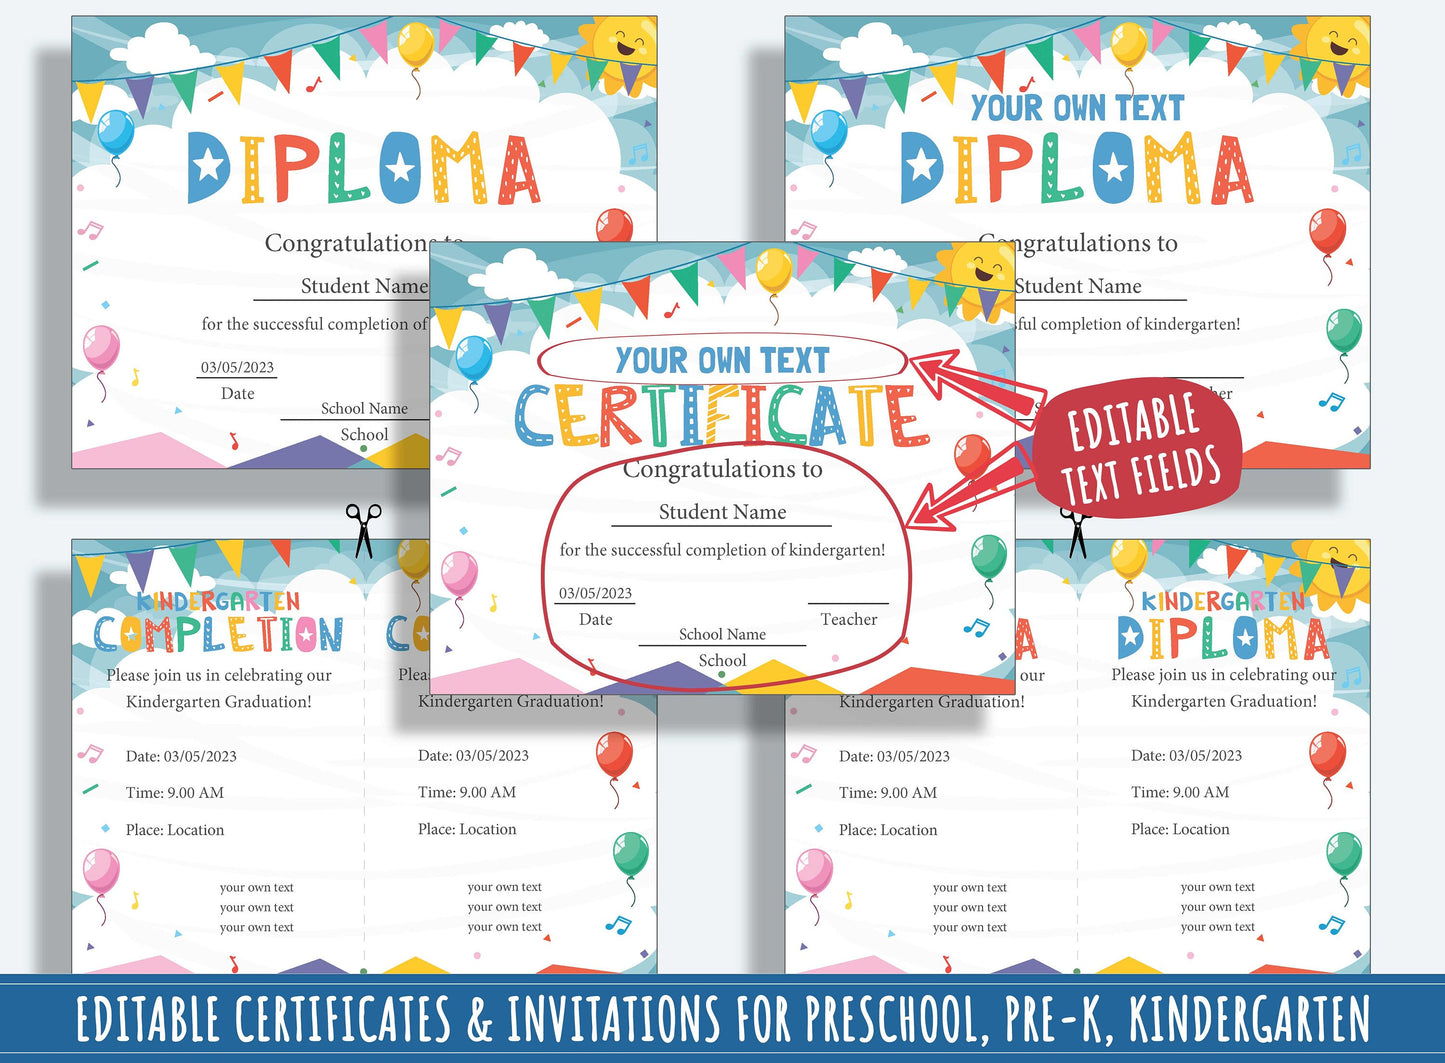 Up, Up, and Away: 37 Editable Pages of Balloon-themed Diplomas, Certificates, and Invitations for Preschool, Kindergarten, Instant Download